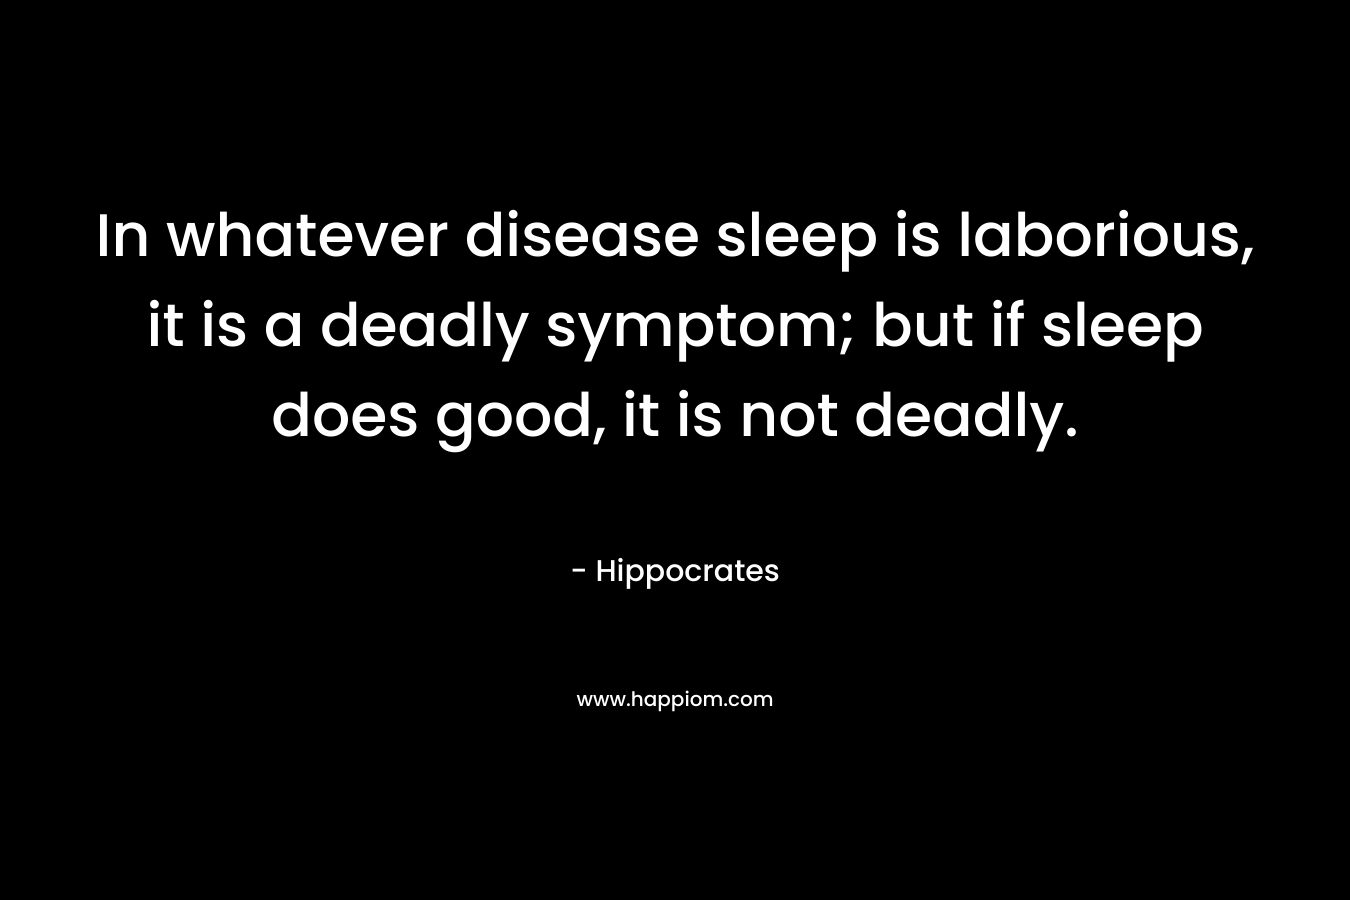 In whatever disease sleep is laborious, it is a deadly symptom; but if sleep does good, it is not deadly. – Hippocrates